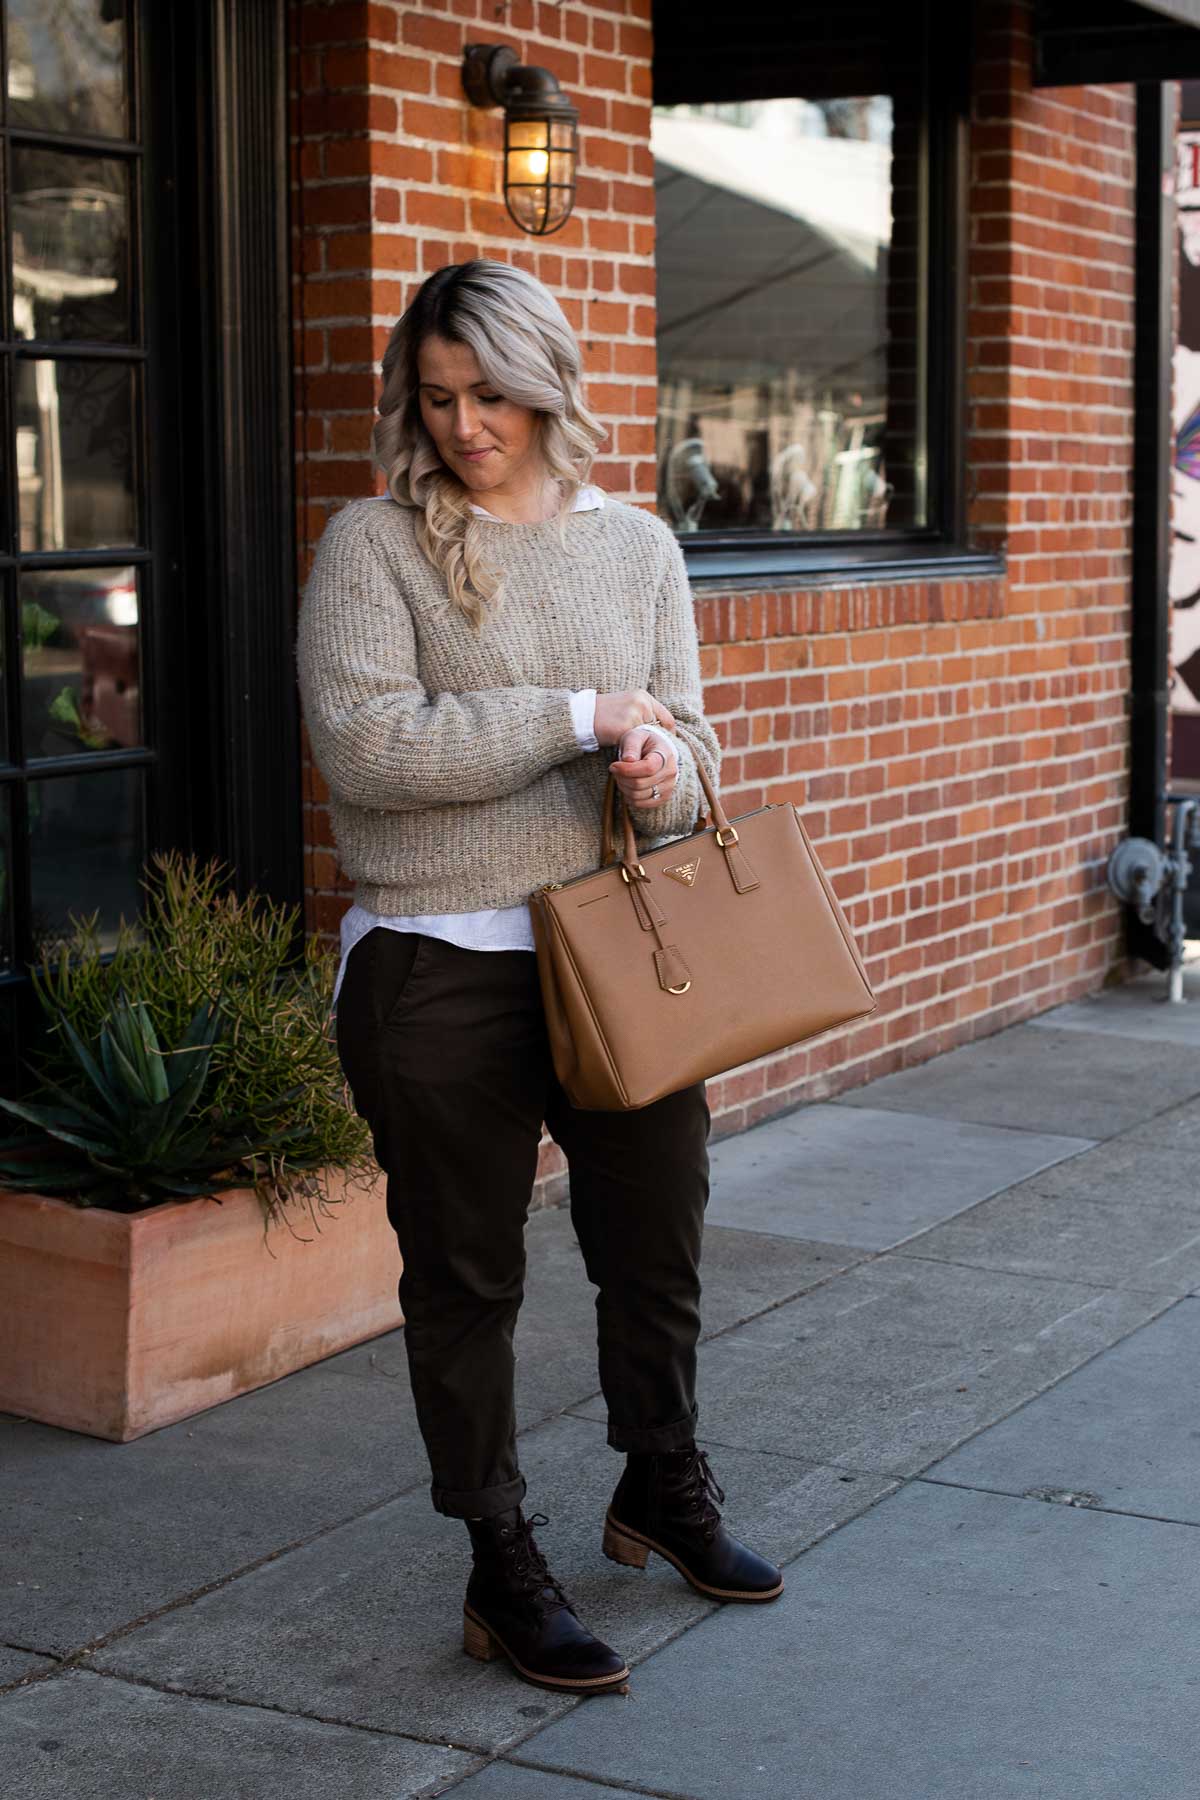 Linen in Winter Outfit - White LInen Button down under cashmere sweater, chinos, Prada tote, and Timberland boots